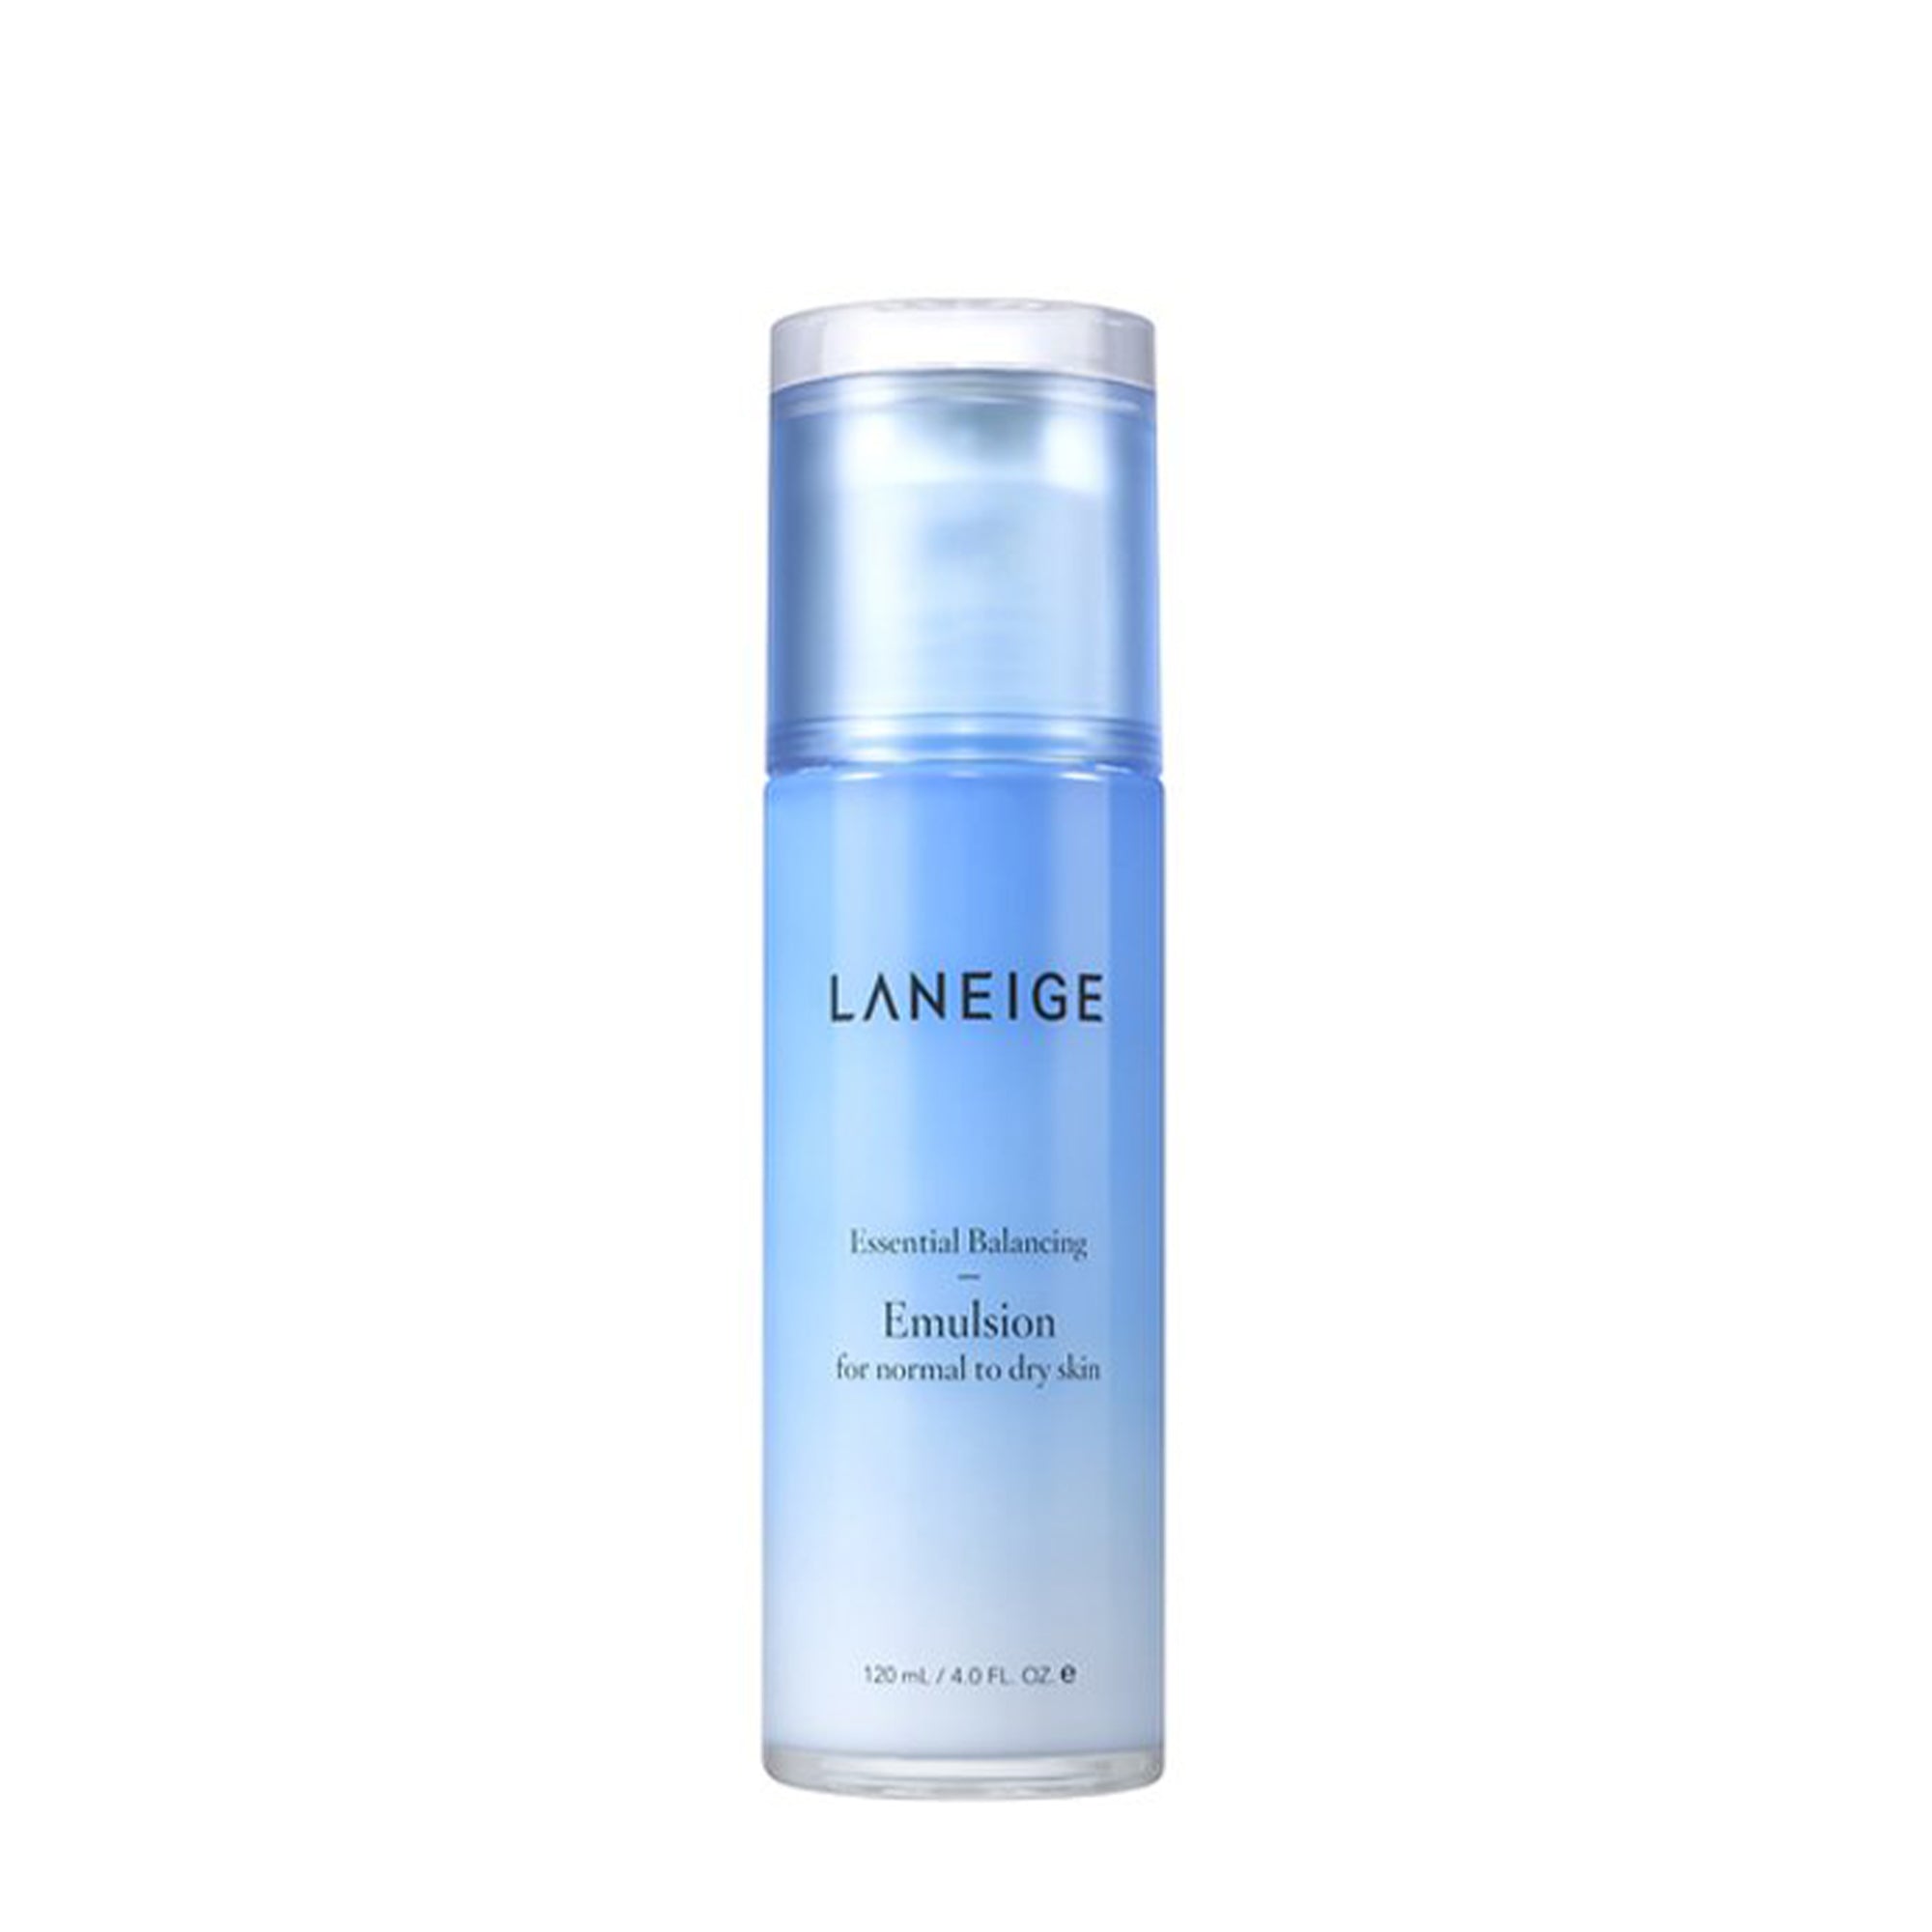 LANEIGE - Essential Balancing Emulsion for Normal to Dry Skin